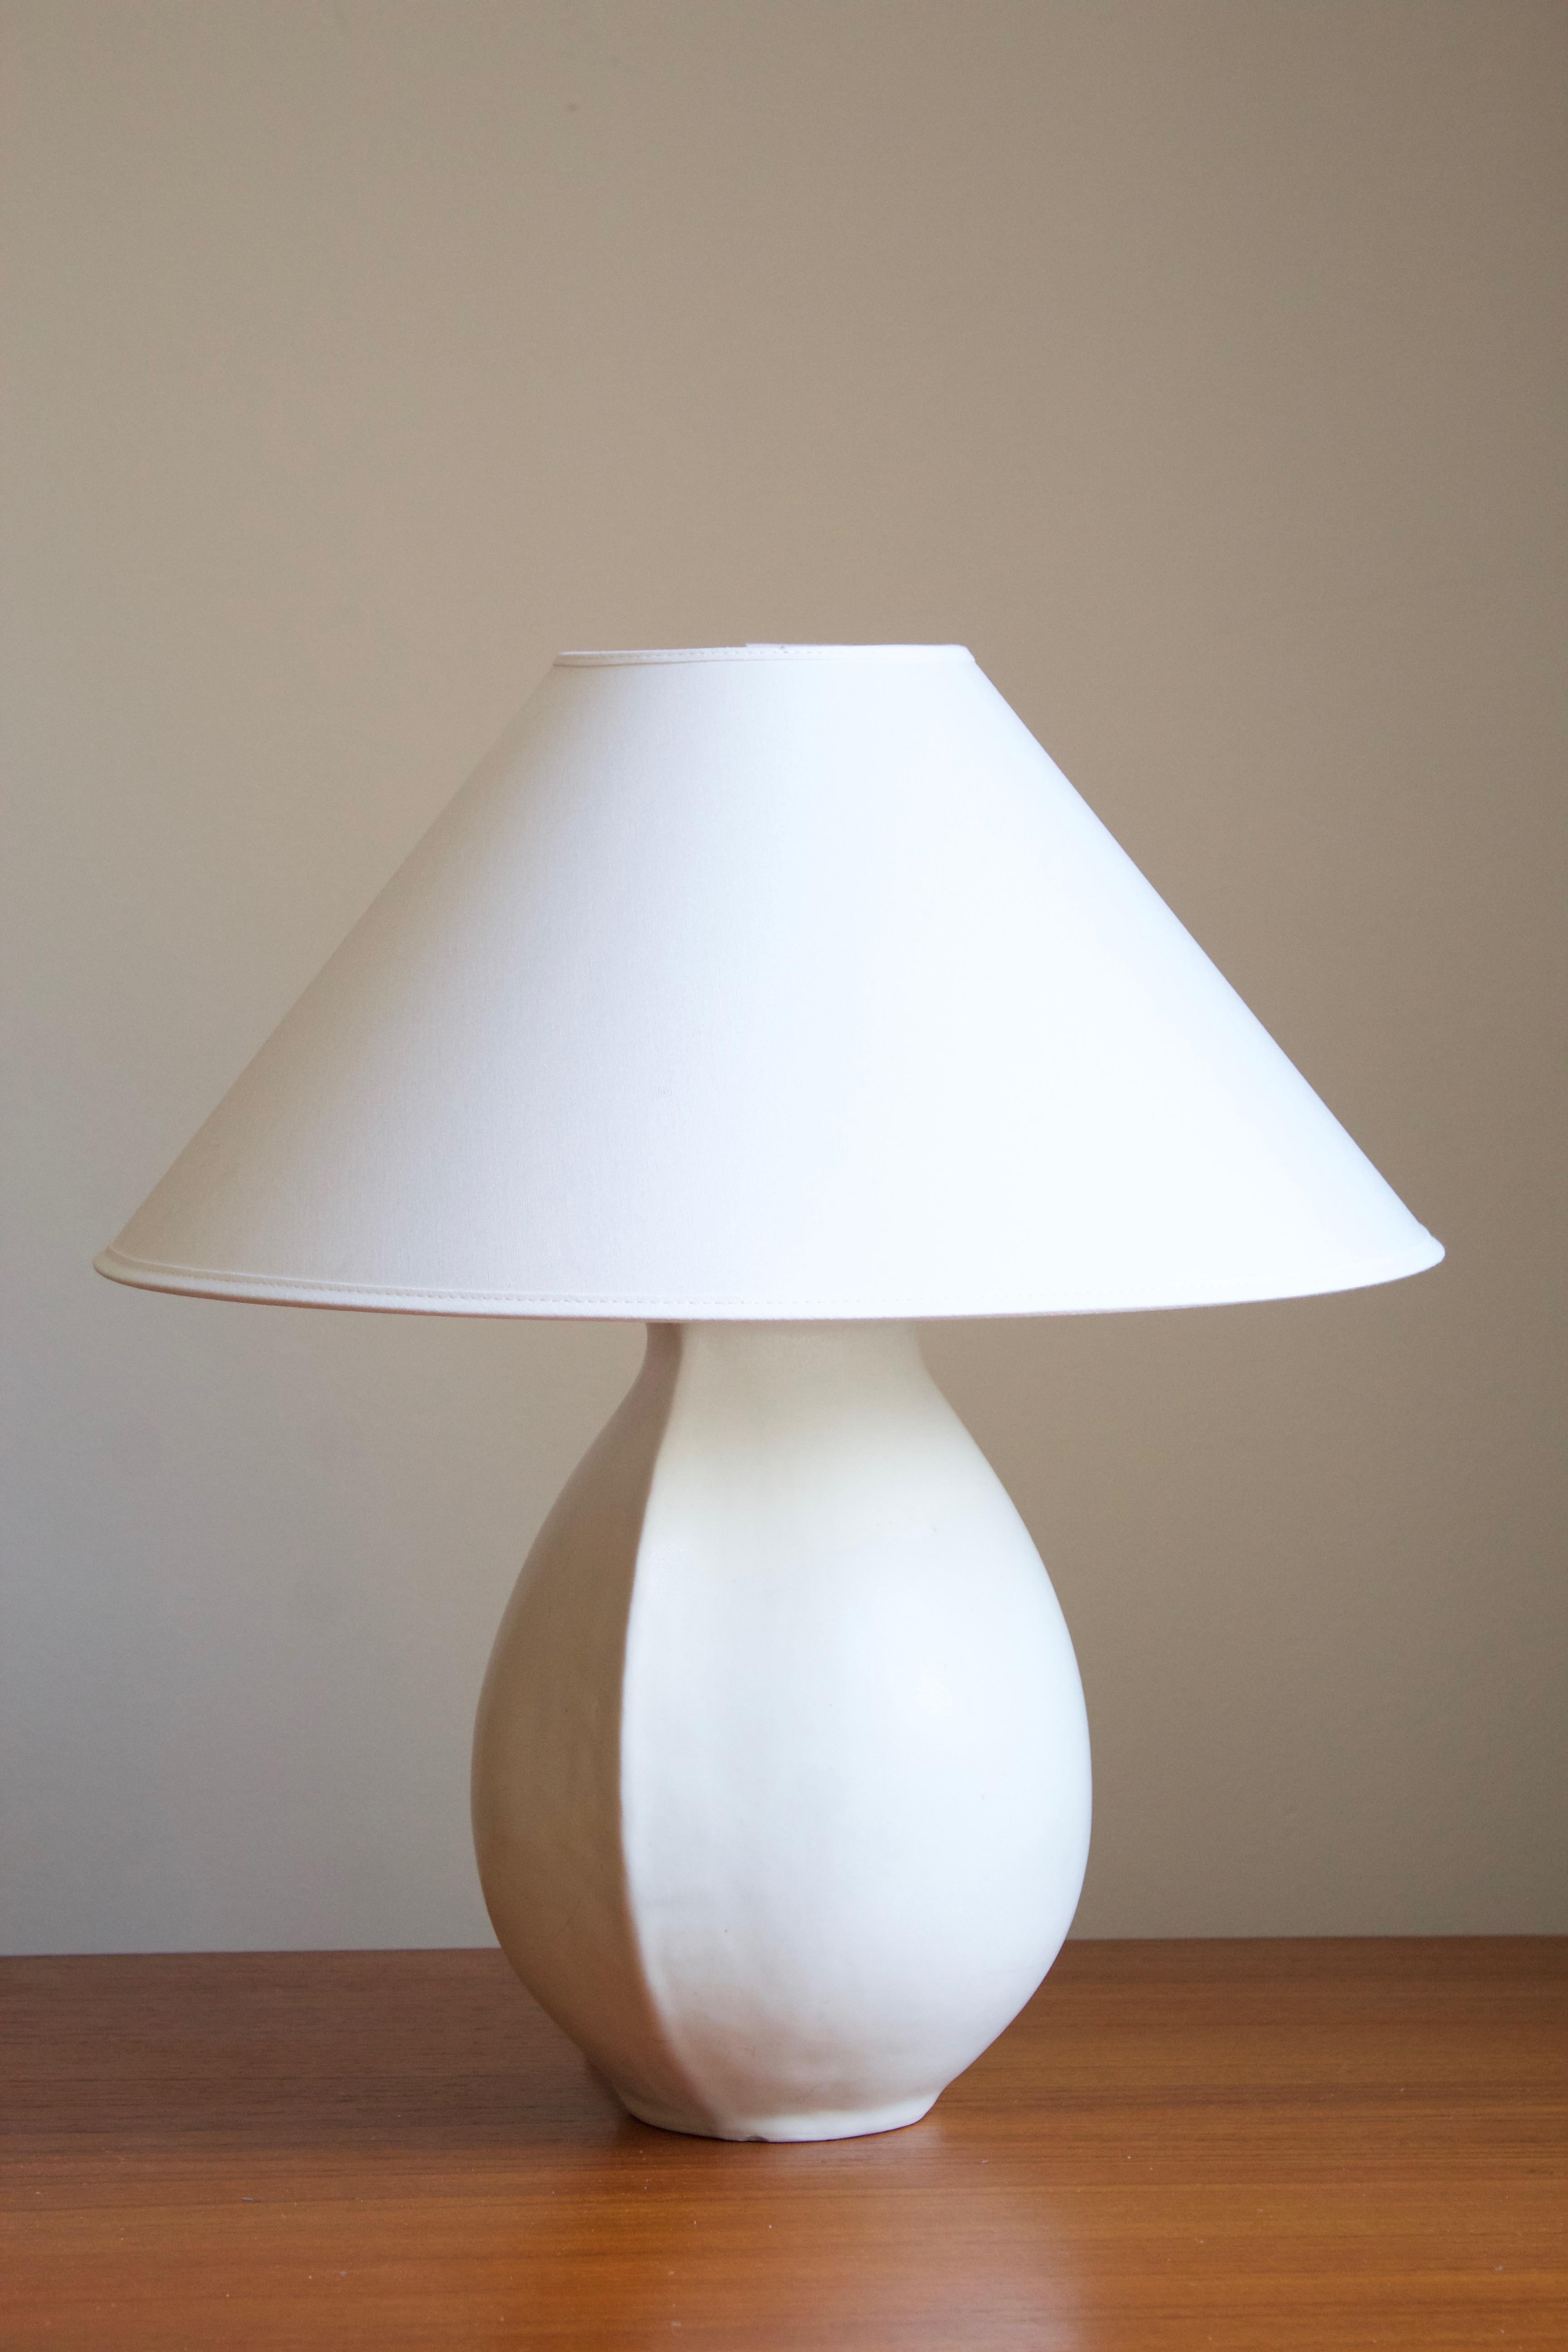 A sizable handmade table lamp. Designed and produced by Preben Brandt Larsen in his studio in Fejø, Denmark. Features matte-white glaze typical to artists. 

Glaze features a white color.

Sold without lampshade. Stated dimensions exclude the